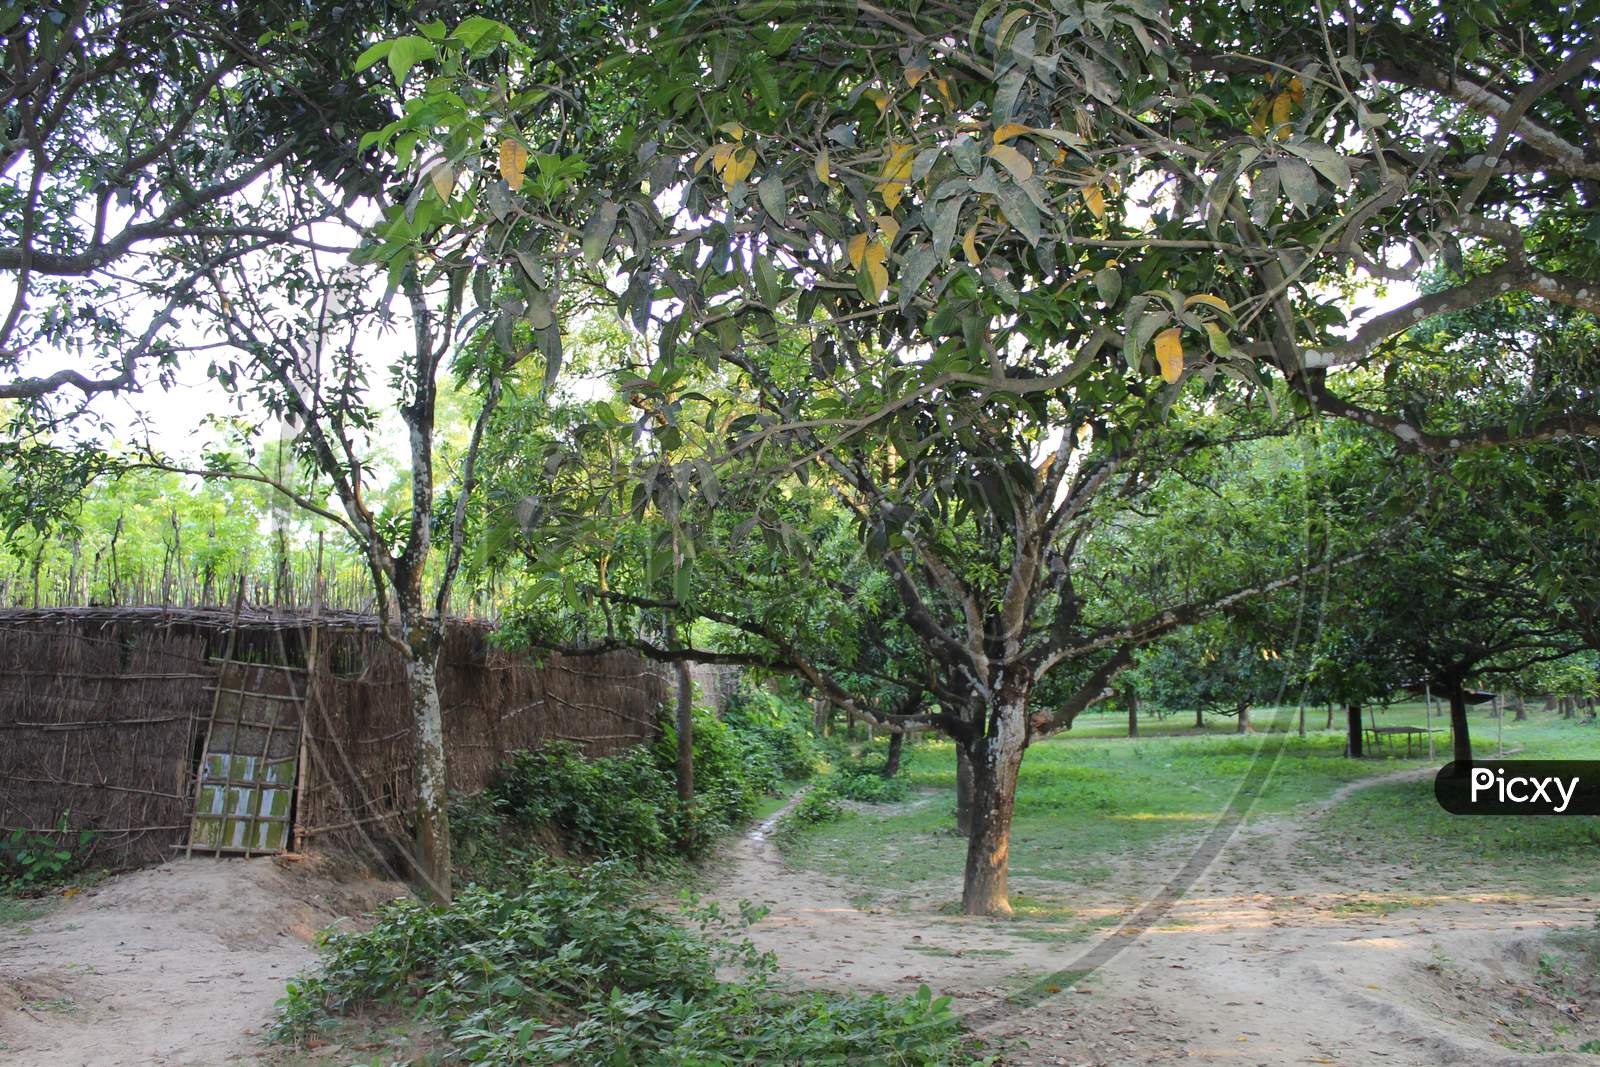 view of a rural Indian village